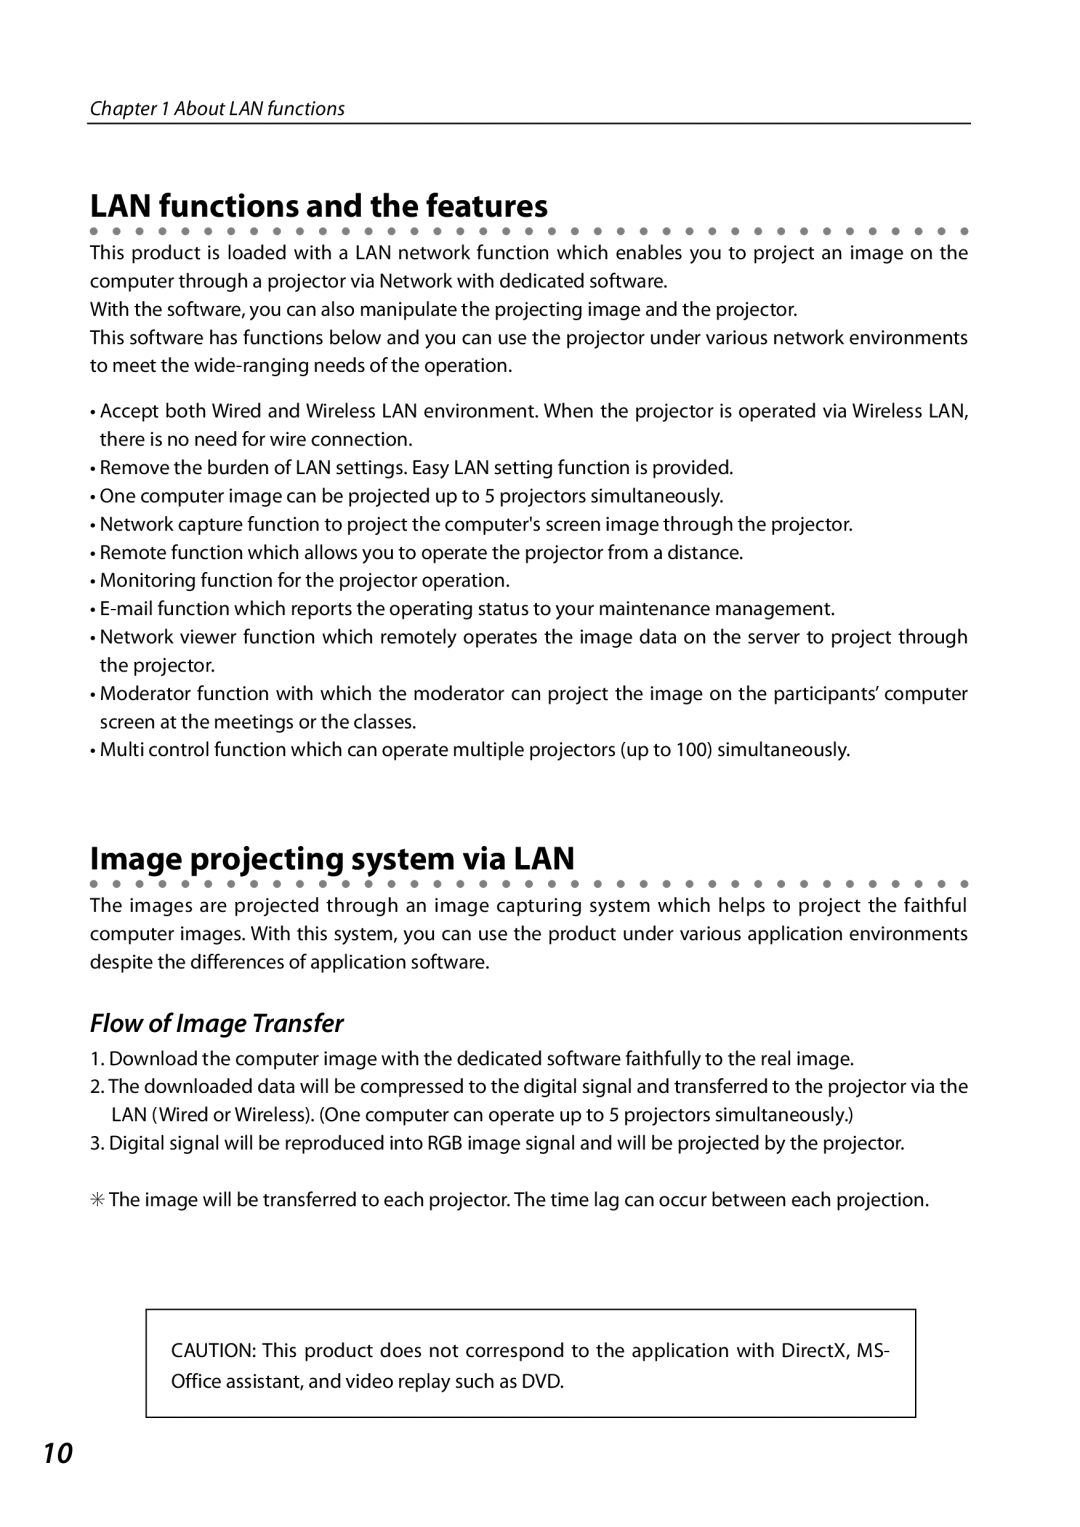 Sanyo PLCXL51 LAN functions and the features, Image projecting system via LAN, Flow of Image Transfer, About LAN functions 